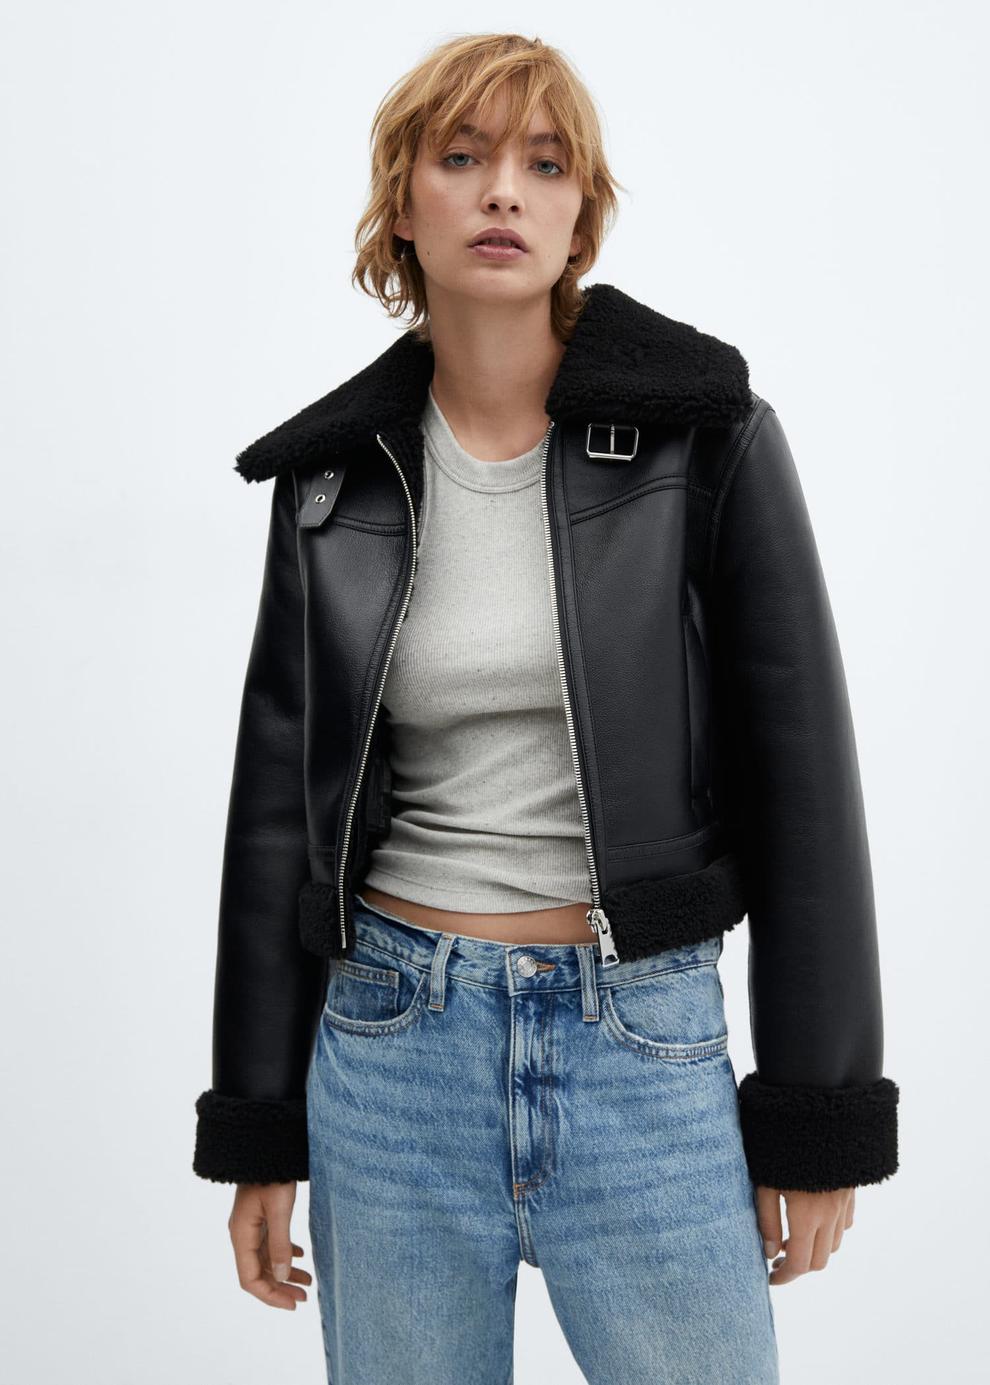 Faux shearling-lined biker jacket offers at S$ 89.9 in Mango